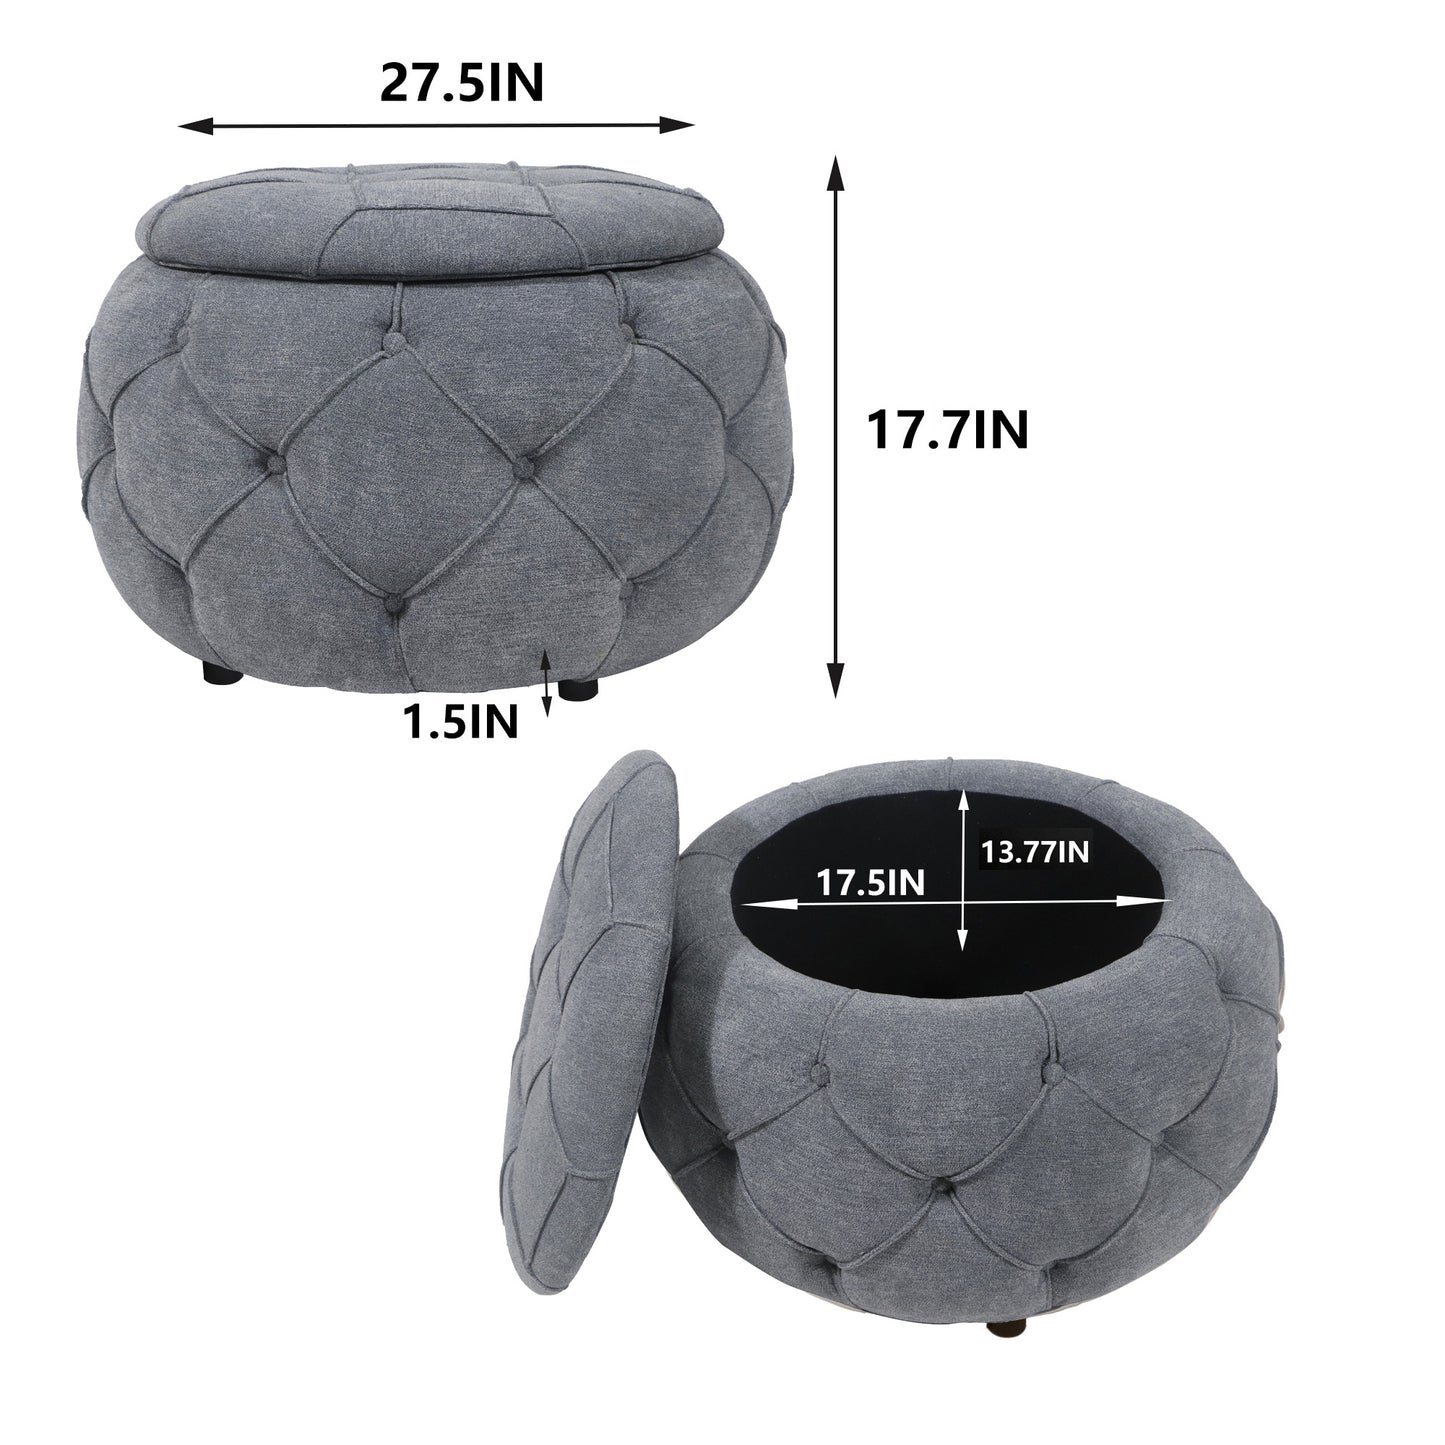 SogesPower Large Button Tufted Woven Round Storage Ottoman for Living Room & Bedroom,17.7"H Burlap Grey